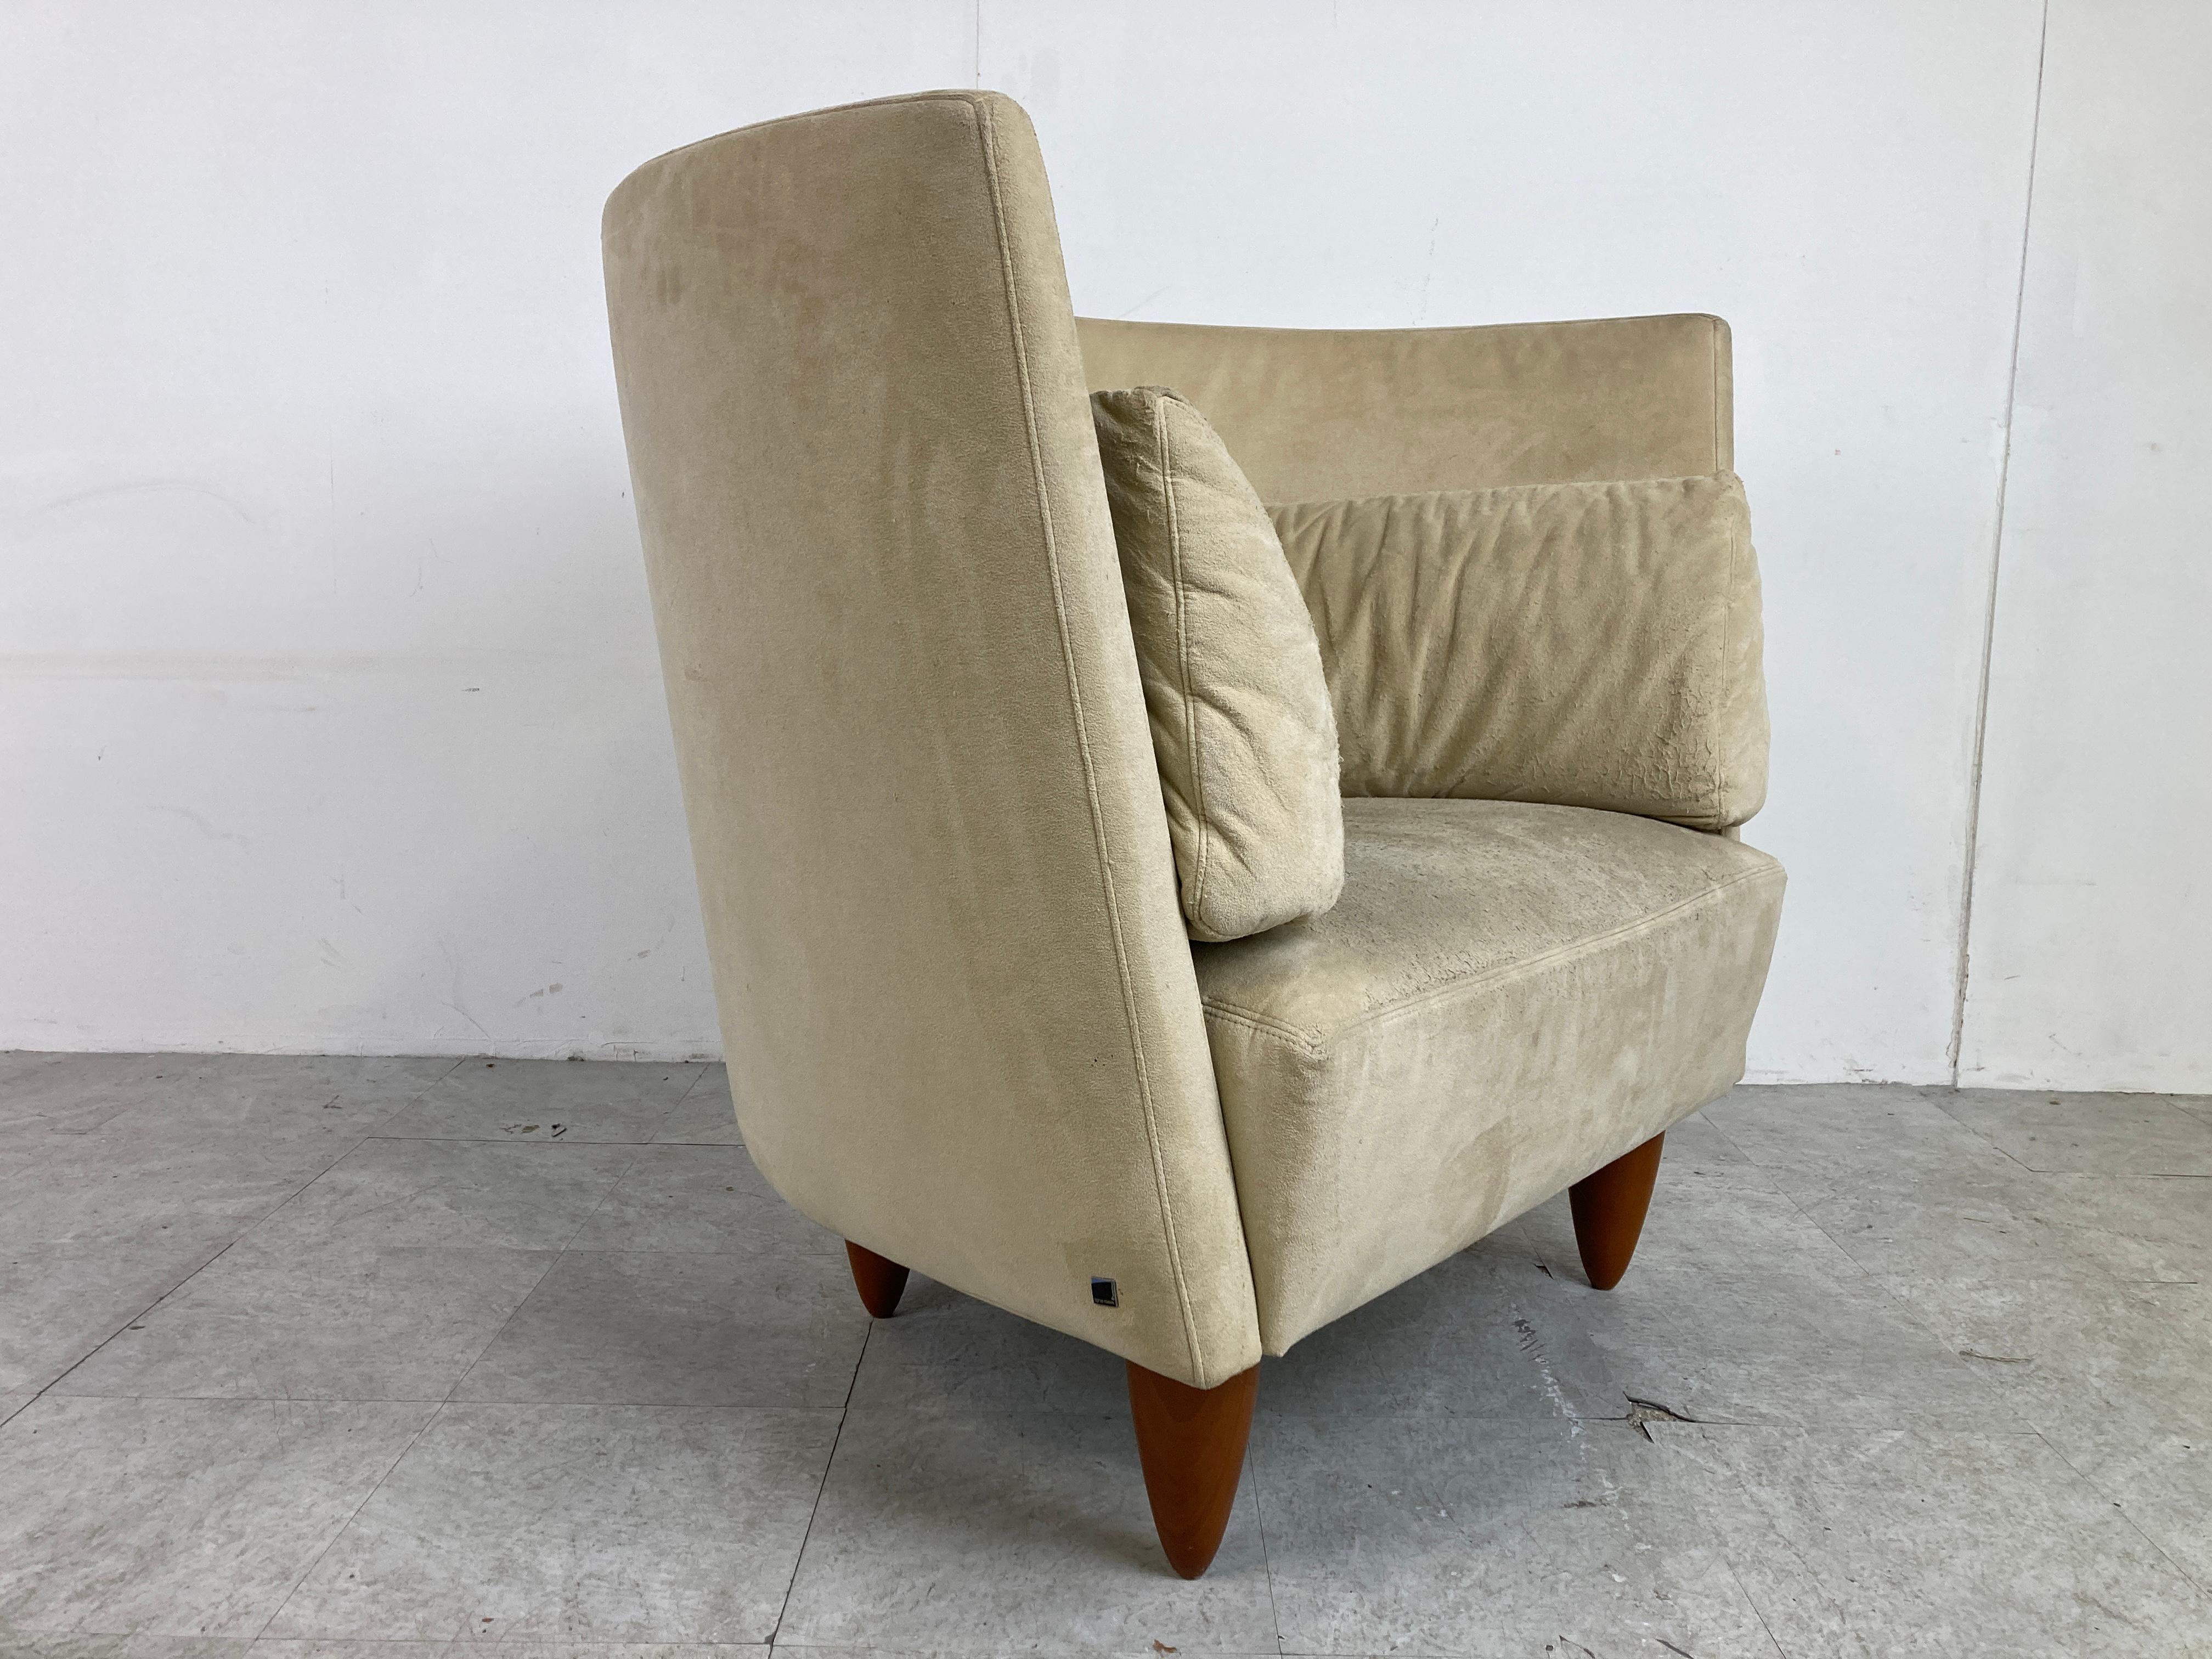 Suede Vintage Highback Lounge Chair by Ligne Roset, 1990s For Sale